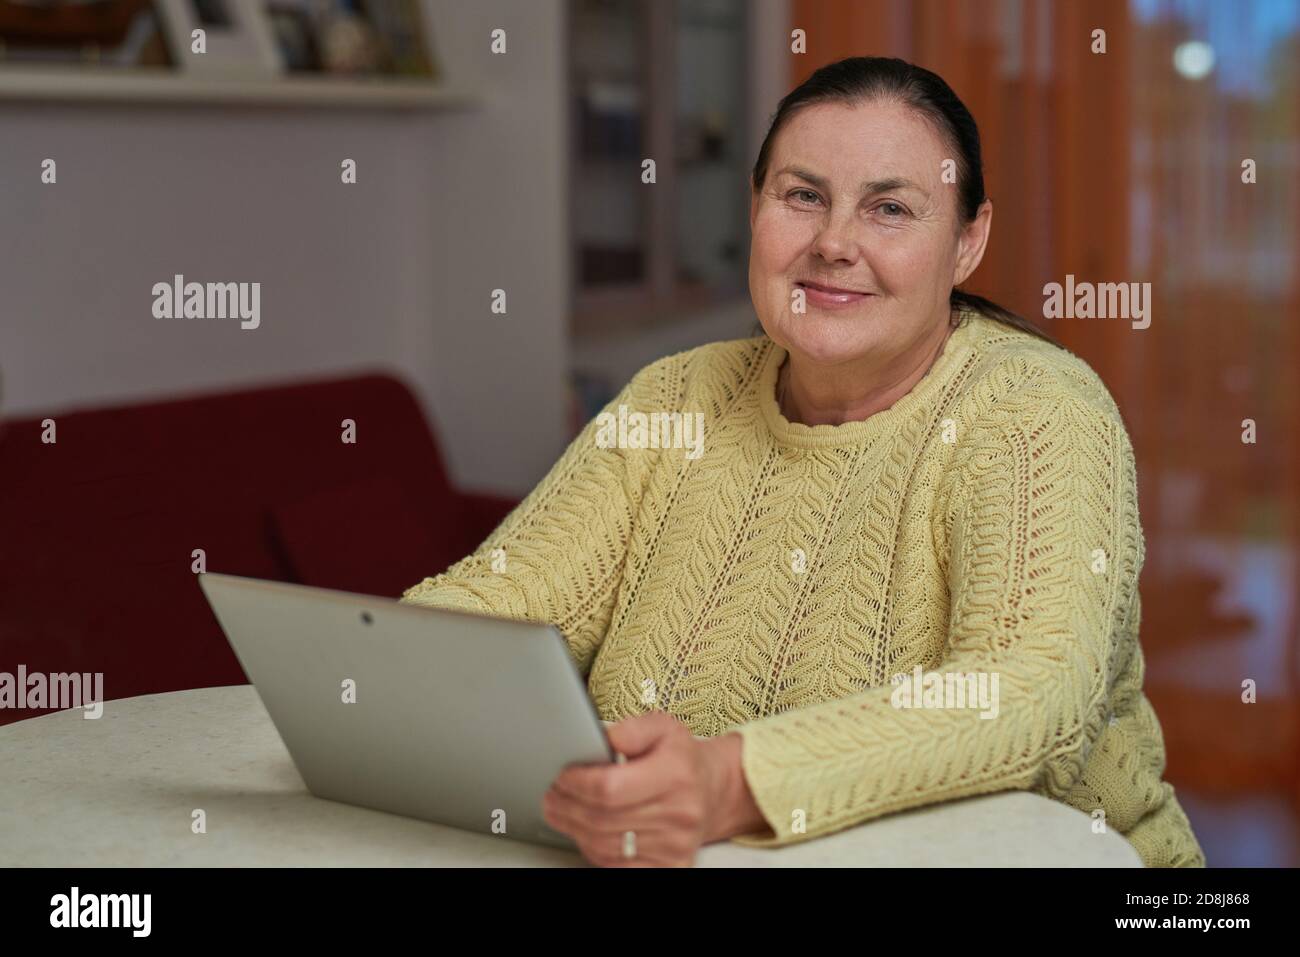 Senior woman in yellow sweater looking in the camera with tablet Stock Photo